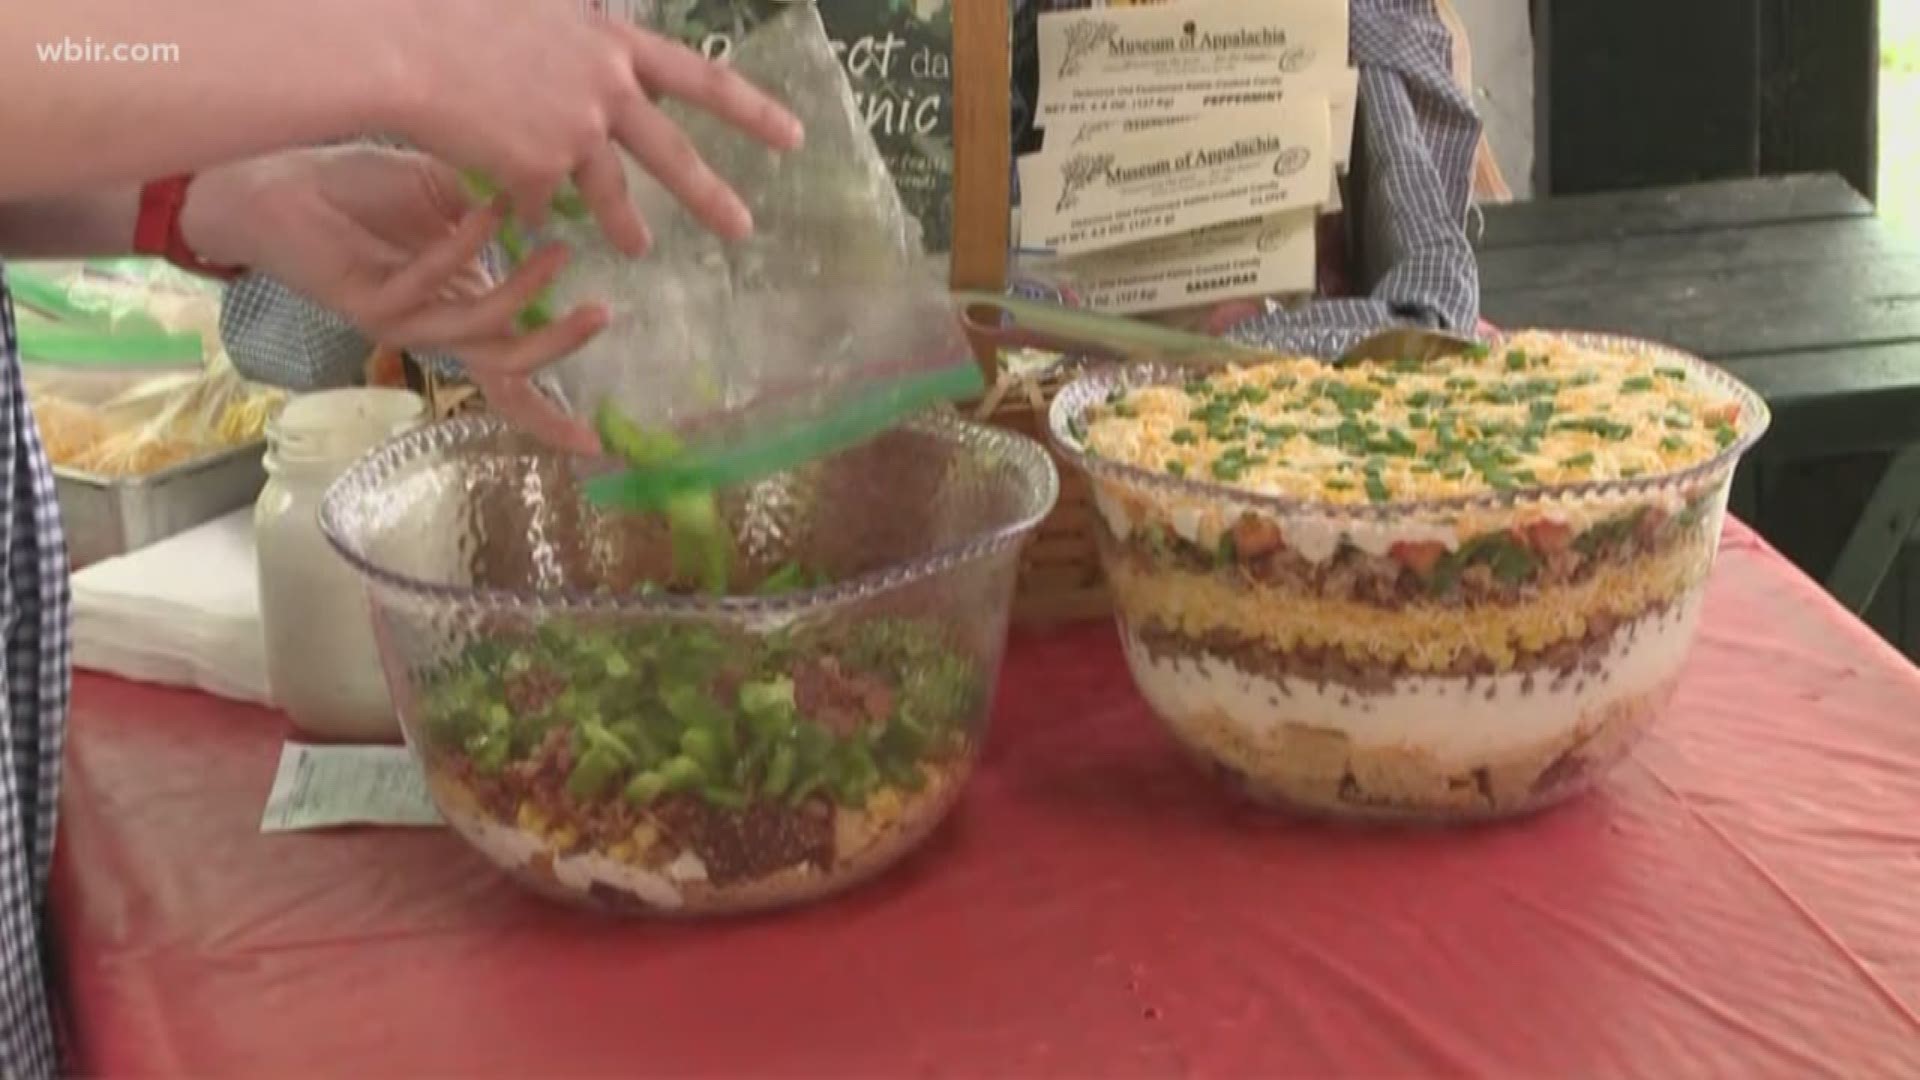 The Museum of Appalachia shares a recipe for layered cornbread salad. Make sure to keep to keep it cooled. April 25, 2019-4pm